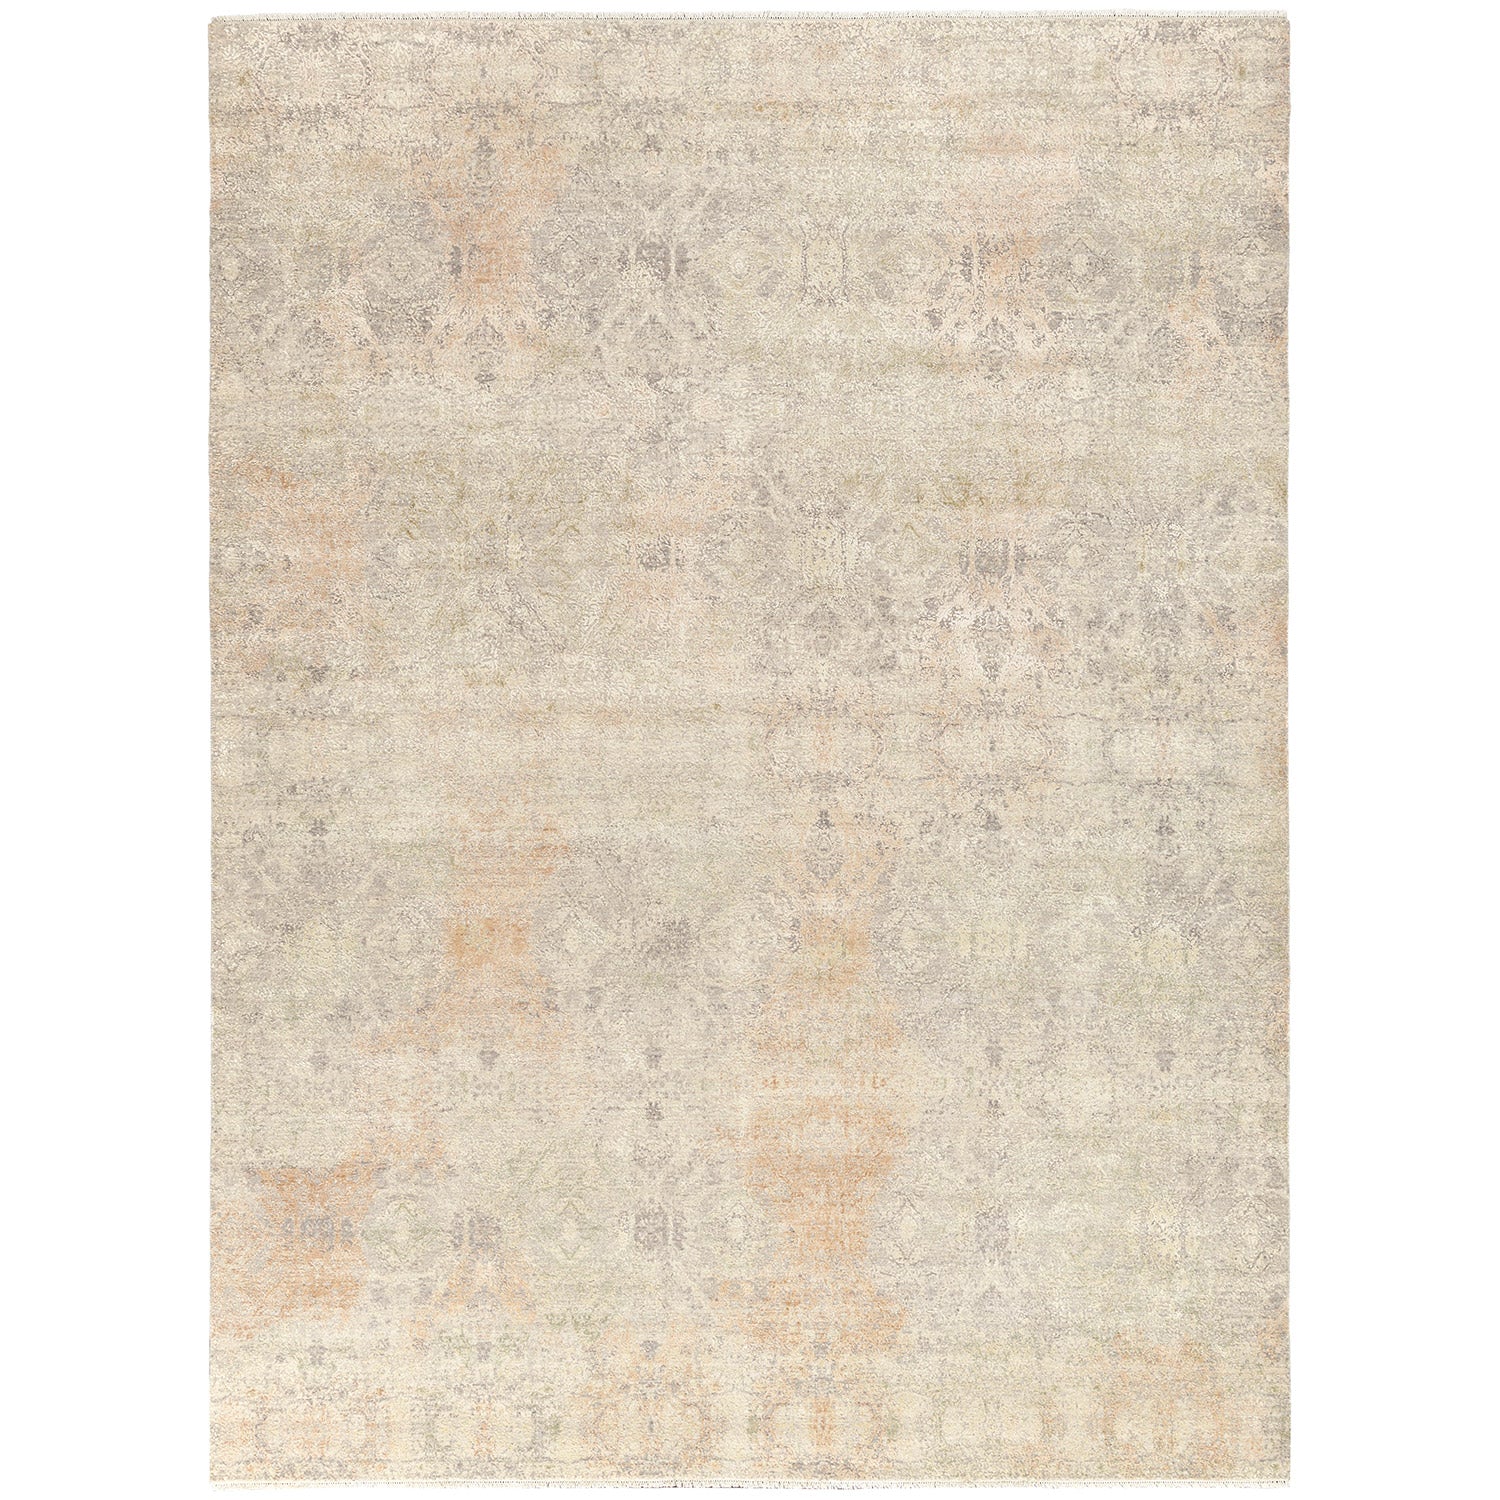 Vintage-inspired rectangular area rug with distressed design in neutral colors